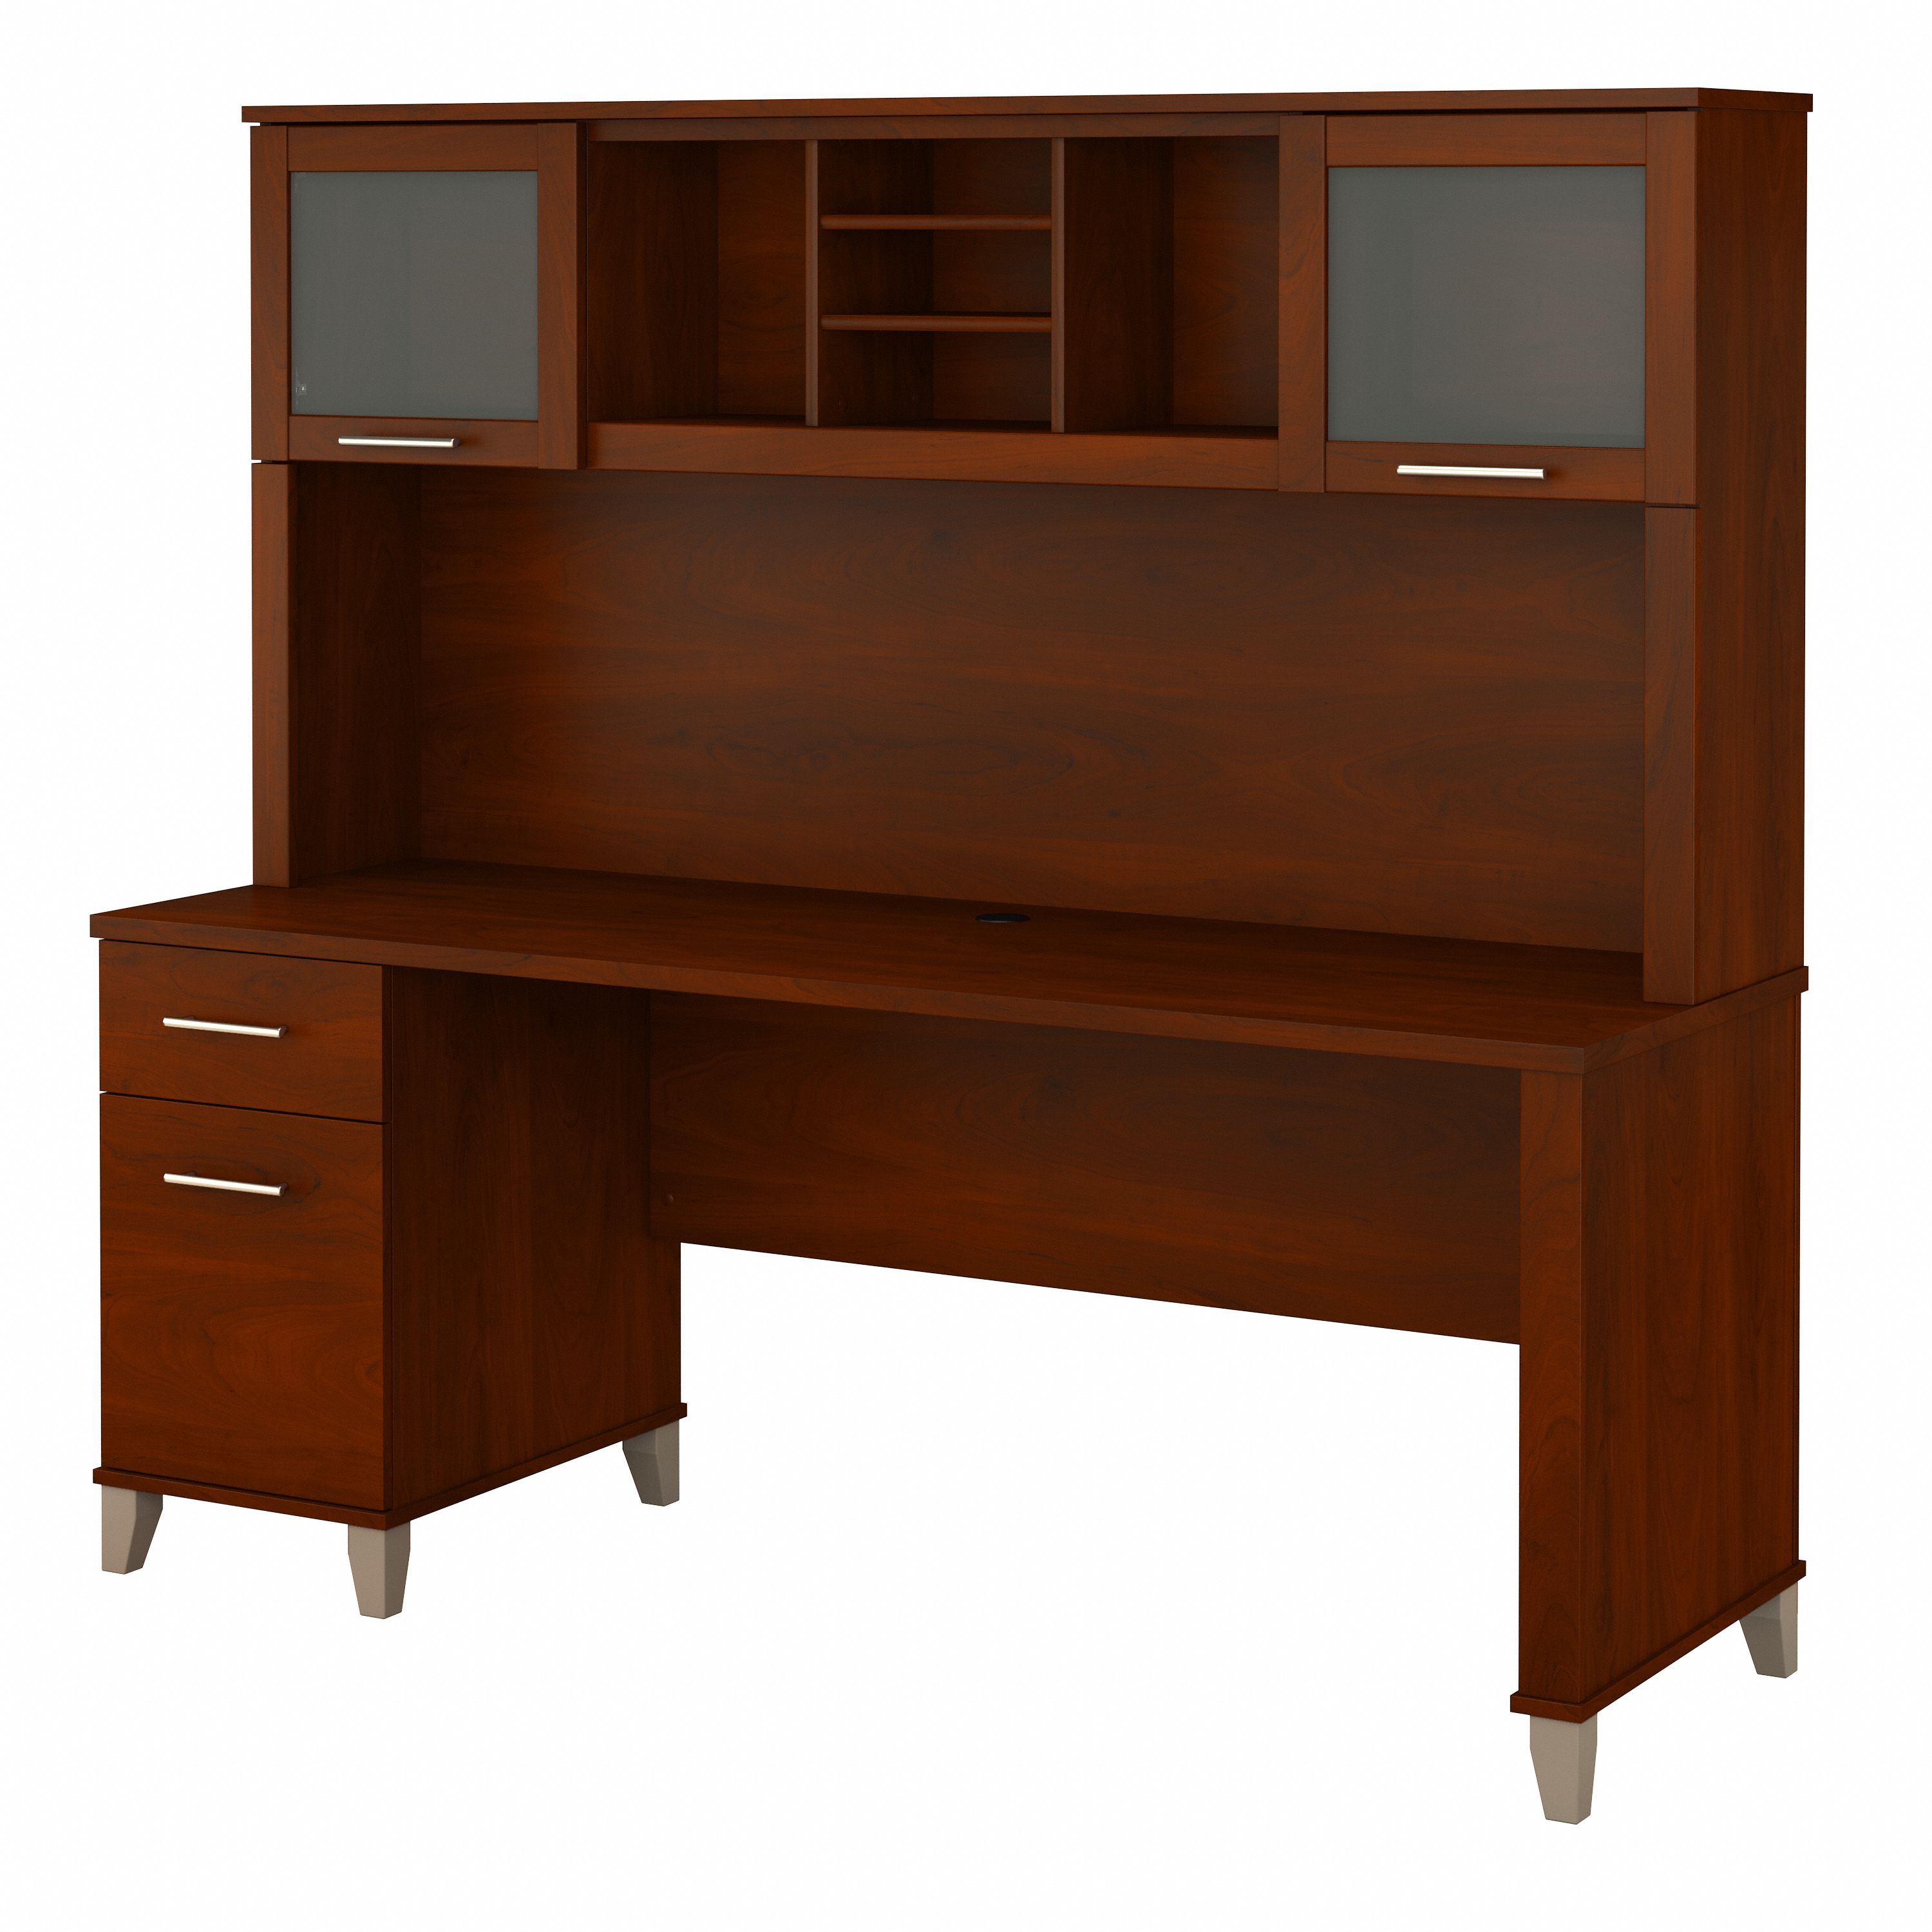 Shop Bush Furniture Somerset 72W Office Desk with Drawers and Hutch 02 SET018HC #color_hansen cherry